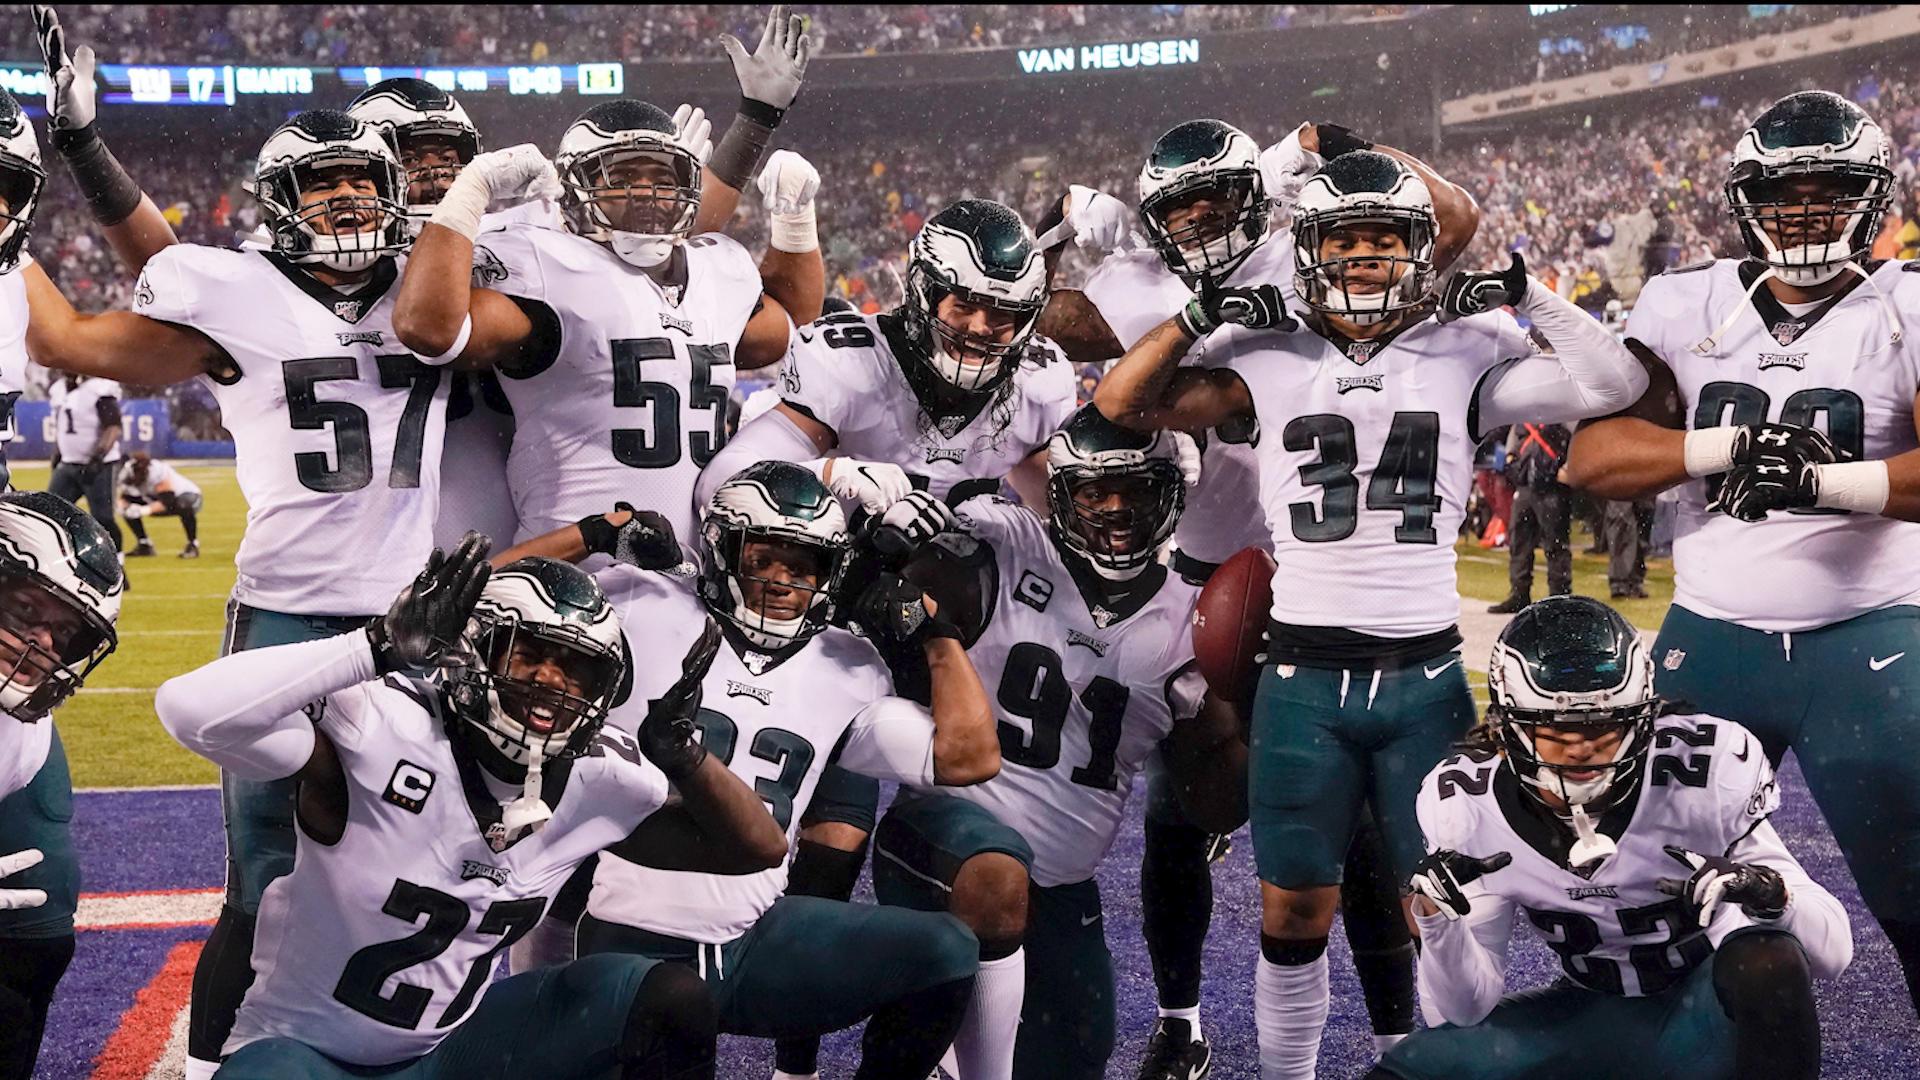 Philadelphia Eagles on X: Your 2019 NFC East Division Champions!  #FlyEaglesFly  / X